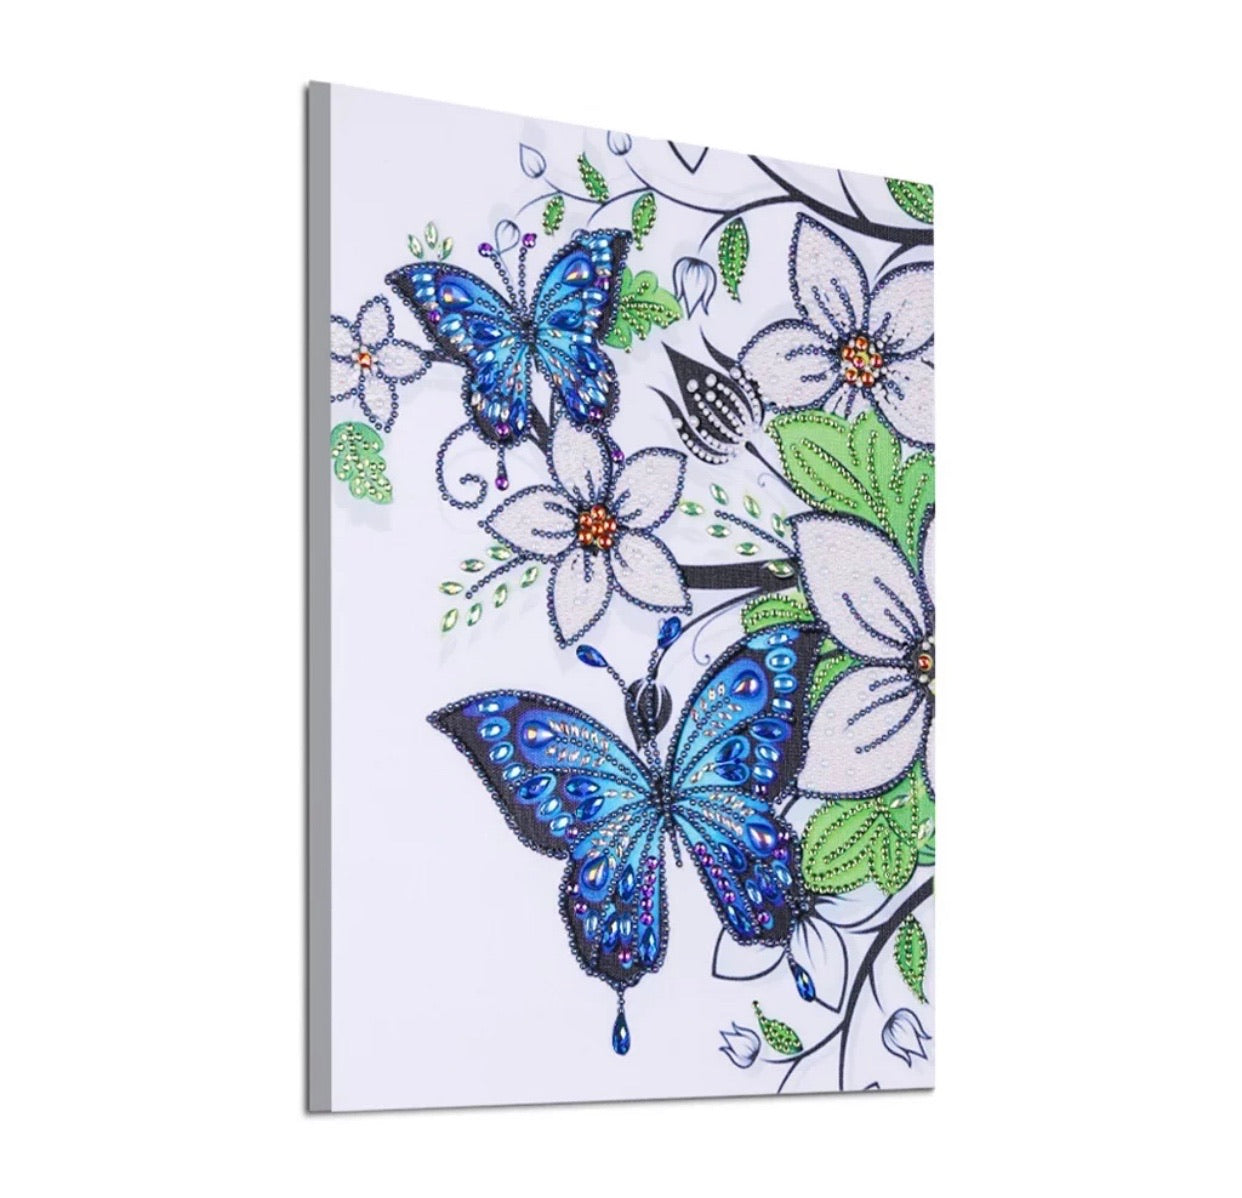 30 x 40 diamond painting (rhinestone) - blue butterfly with white flowers YX8058